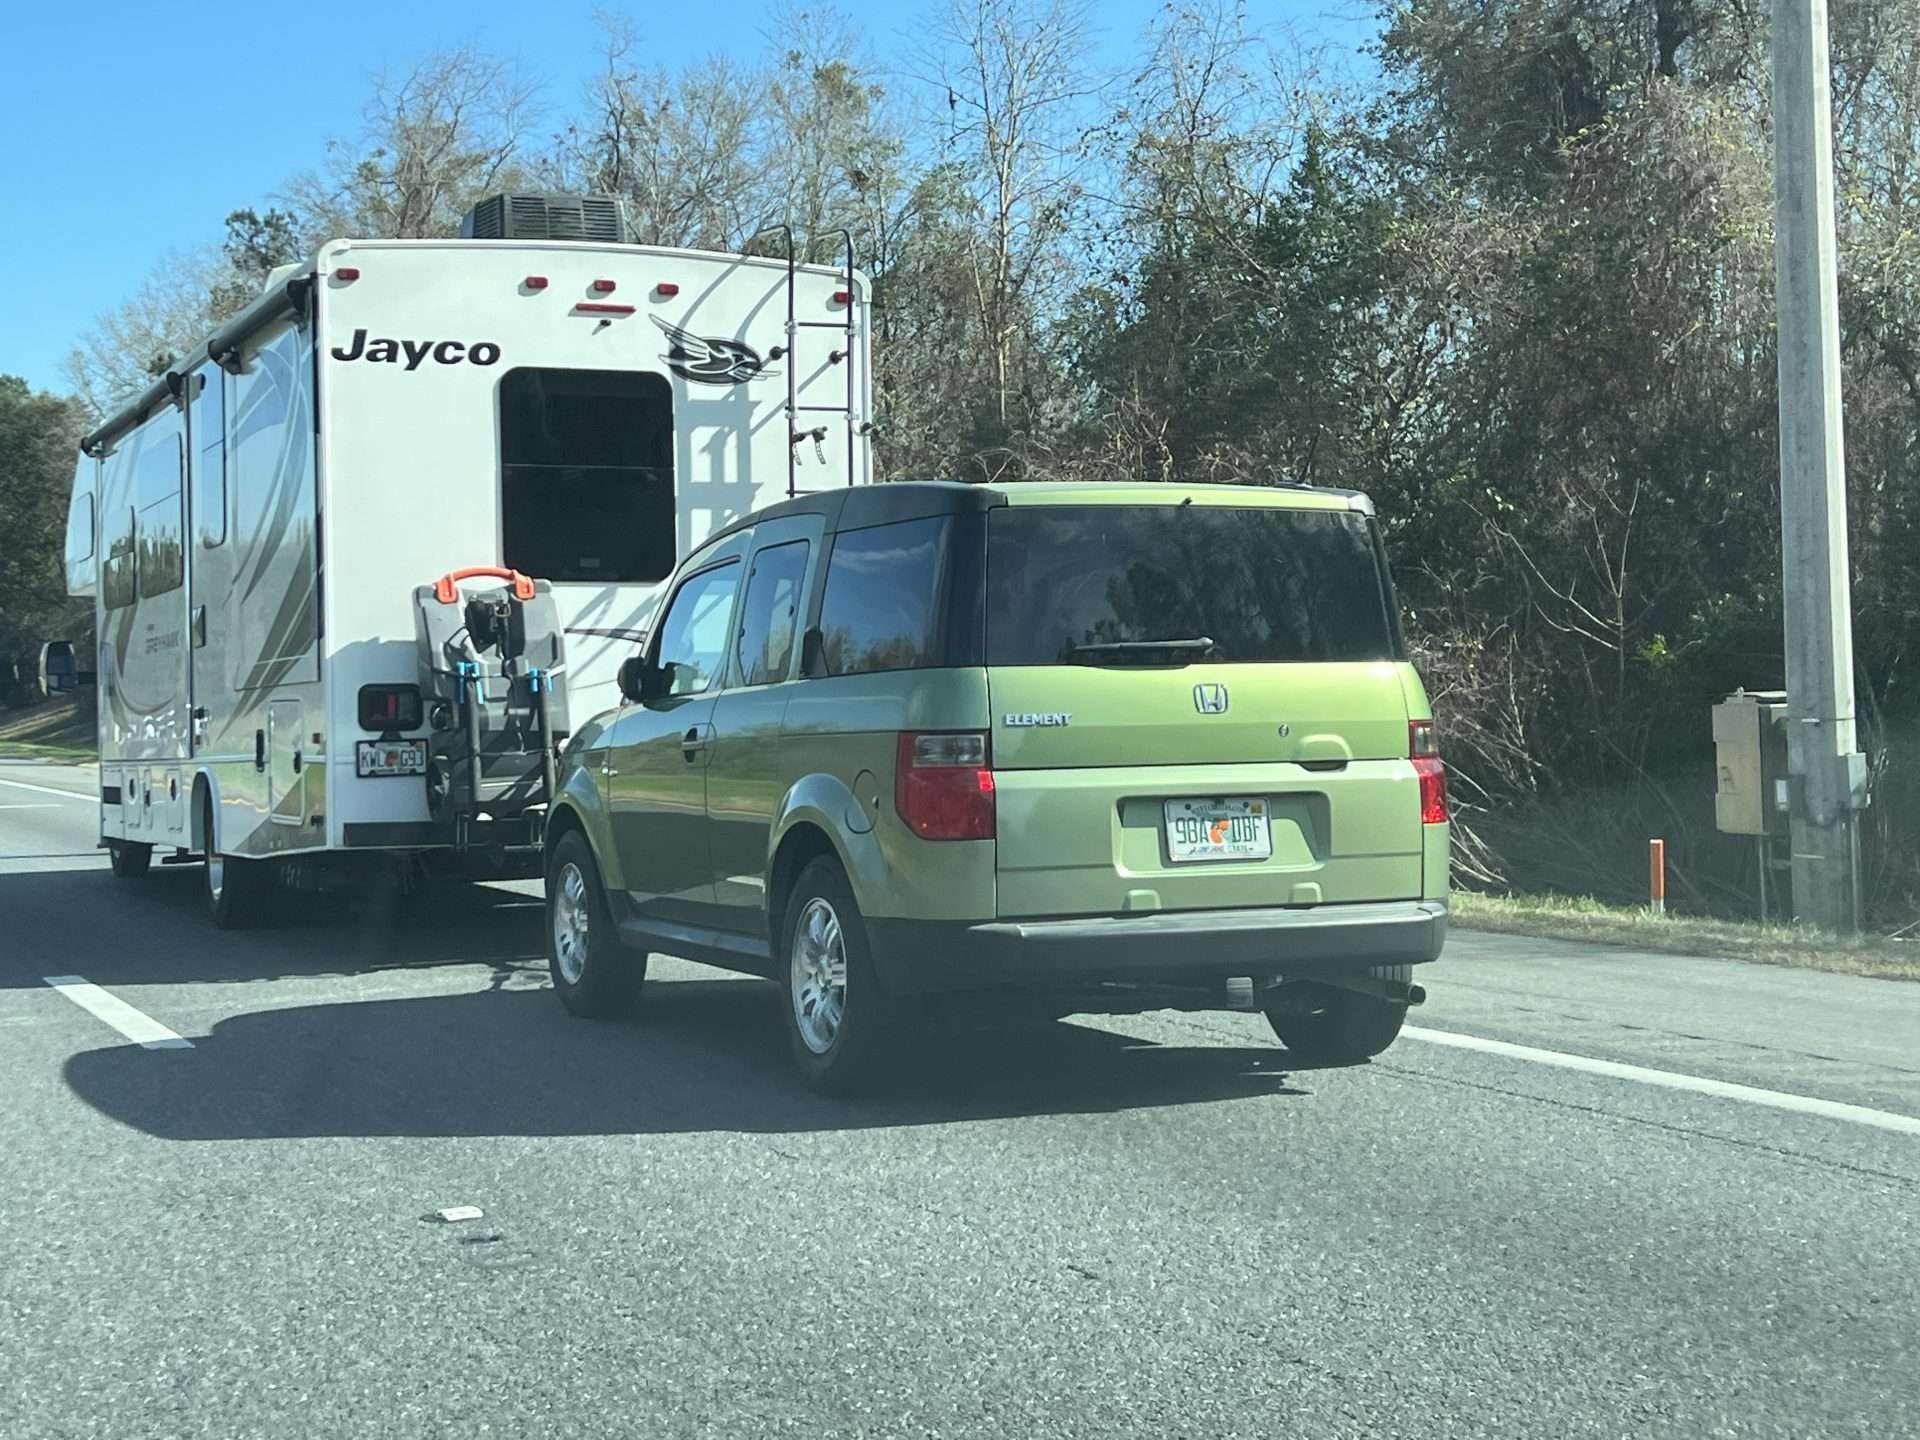 Green Honda Element being towed by RV